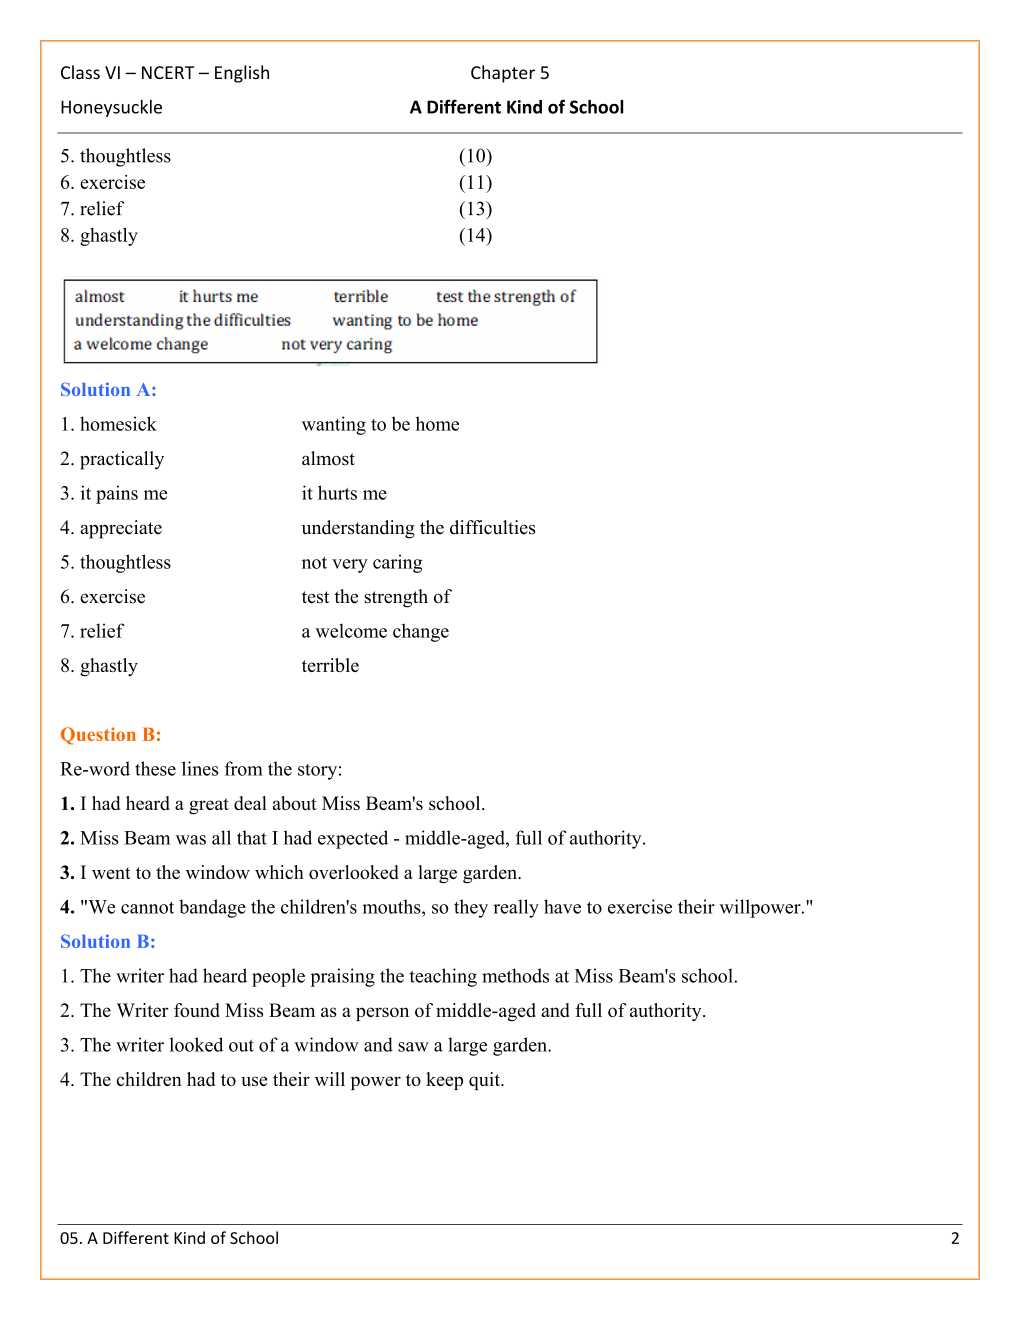 NCERT Solutions For Class 6 English Honeysuckle Chapter 5